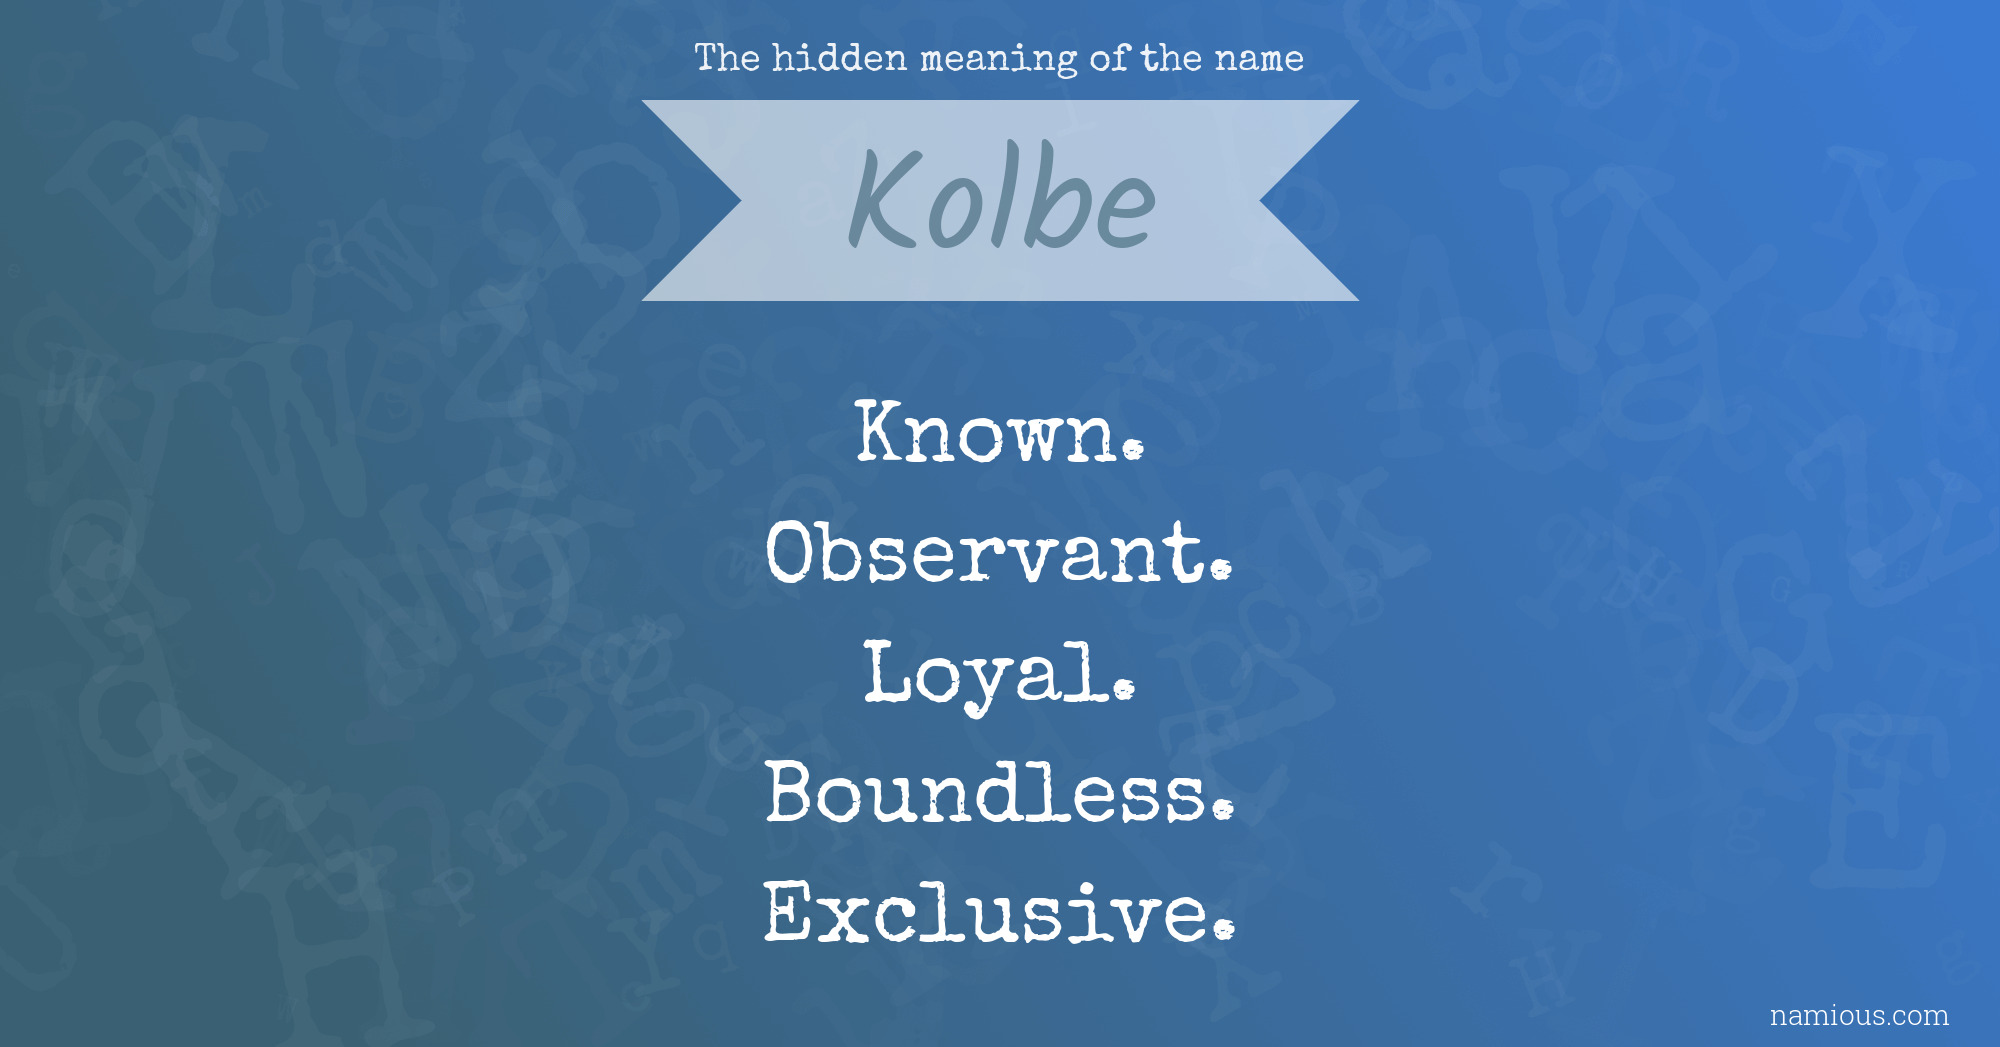 The hidden meaning of the name Kolbe